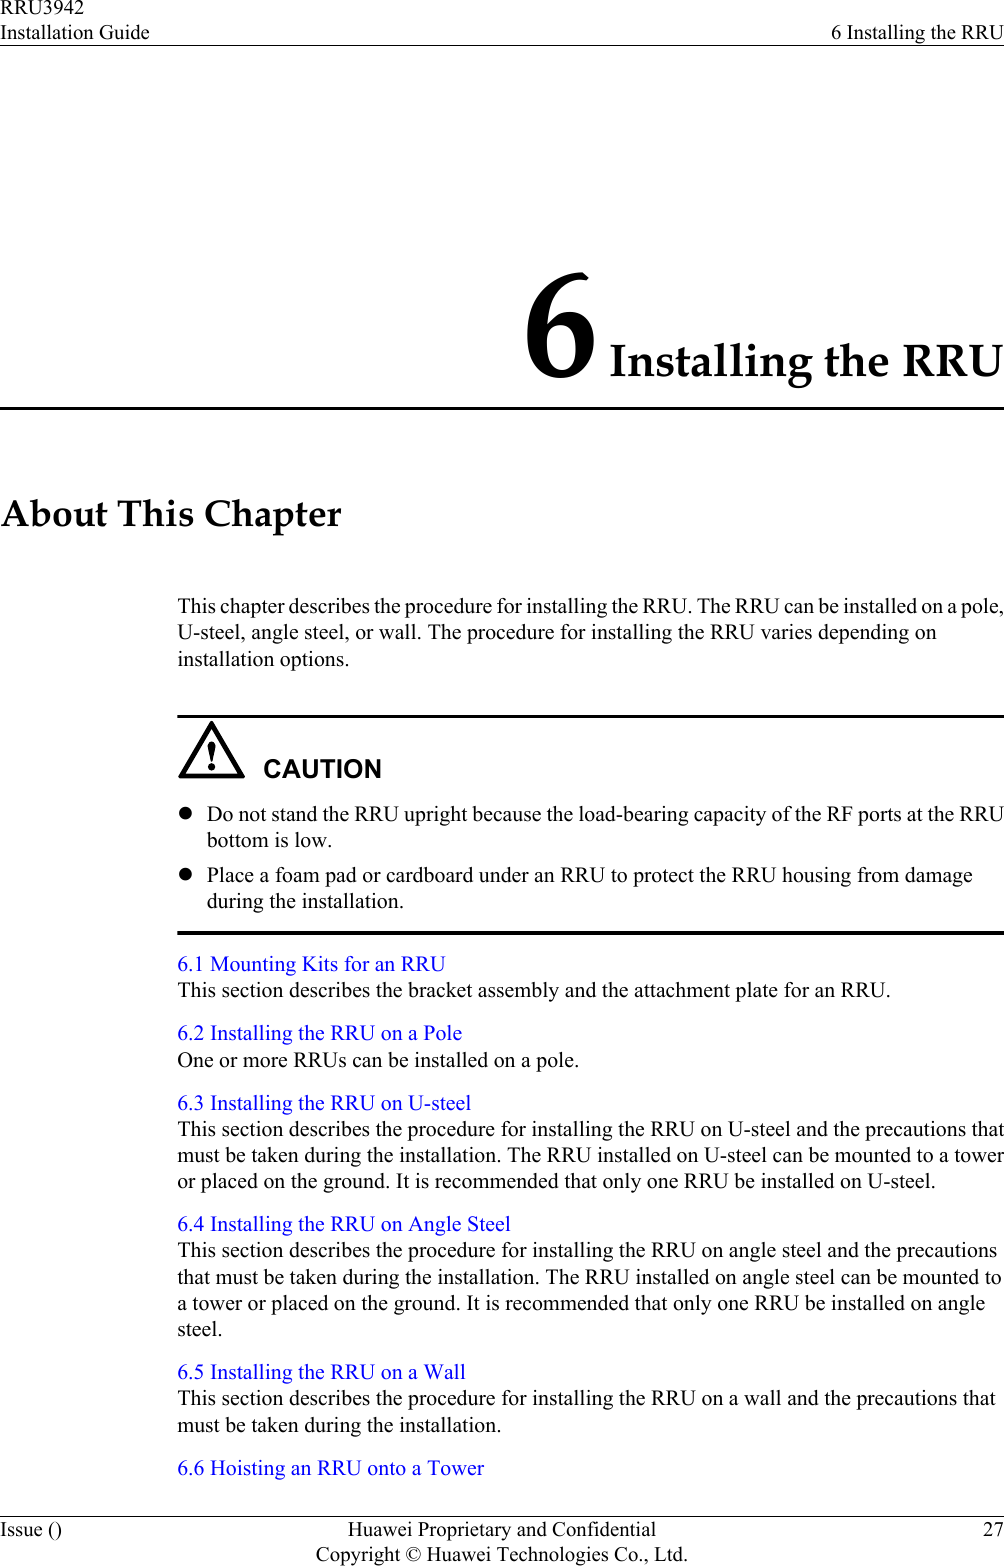 6 Installing the RRUAbout This ChapterThis chapter describes the procedure for installing the RRU. The RRU can be installed on a pole,U-steel, angle steel, or wall. The procedure for installing the RRU varies depending oninstallation options.CAUTIONlDo not stand the RRU upright because the load-bearing capacity of the RF ports at the RRUbottom is low.lPlace a foam pad or cardboard under an RRU to protect the RRU housing from damageduring the installation.6.1 Mounting Kits for an RRUThis section describes the bracket assembly and the attachment plate for an RRU.6.2 Installing the RRU on a PoleOne or more RRUs can be installed on a pole.6.3 Installing the RRU on U-steelThis section describes the procedure for installing the RRU on U-steel and the precautions thatmust be taken during the installation. The RRU installed on U-steel can be mounted to a toweror placed on the ground. It is recommended that only one RRU be installed on U-steel.6.4 Installing the RRU on Angle SteelThis section describes the procedure for installing the RRU on angle steel and the precautionsthat must be taken during the installation. The RRU installed on angle steel can be mounted toa tower or placed on the ground. It is recommended that only one RRU be installed on anglesteel.6.5 Installing the RRU on a WallThis section describes the procedure for installing the RRU on a wall and the precautions thatmust be taken during the installation.6.6 Hoisting an RRU onto a TowerRRU3942Installation Guide 6 Installing the RRUIssue () Huawei Proprietary and ConfidentialCopyright © Huawei Technologies Co., Ltd.27